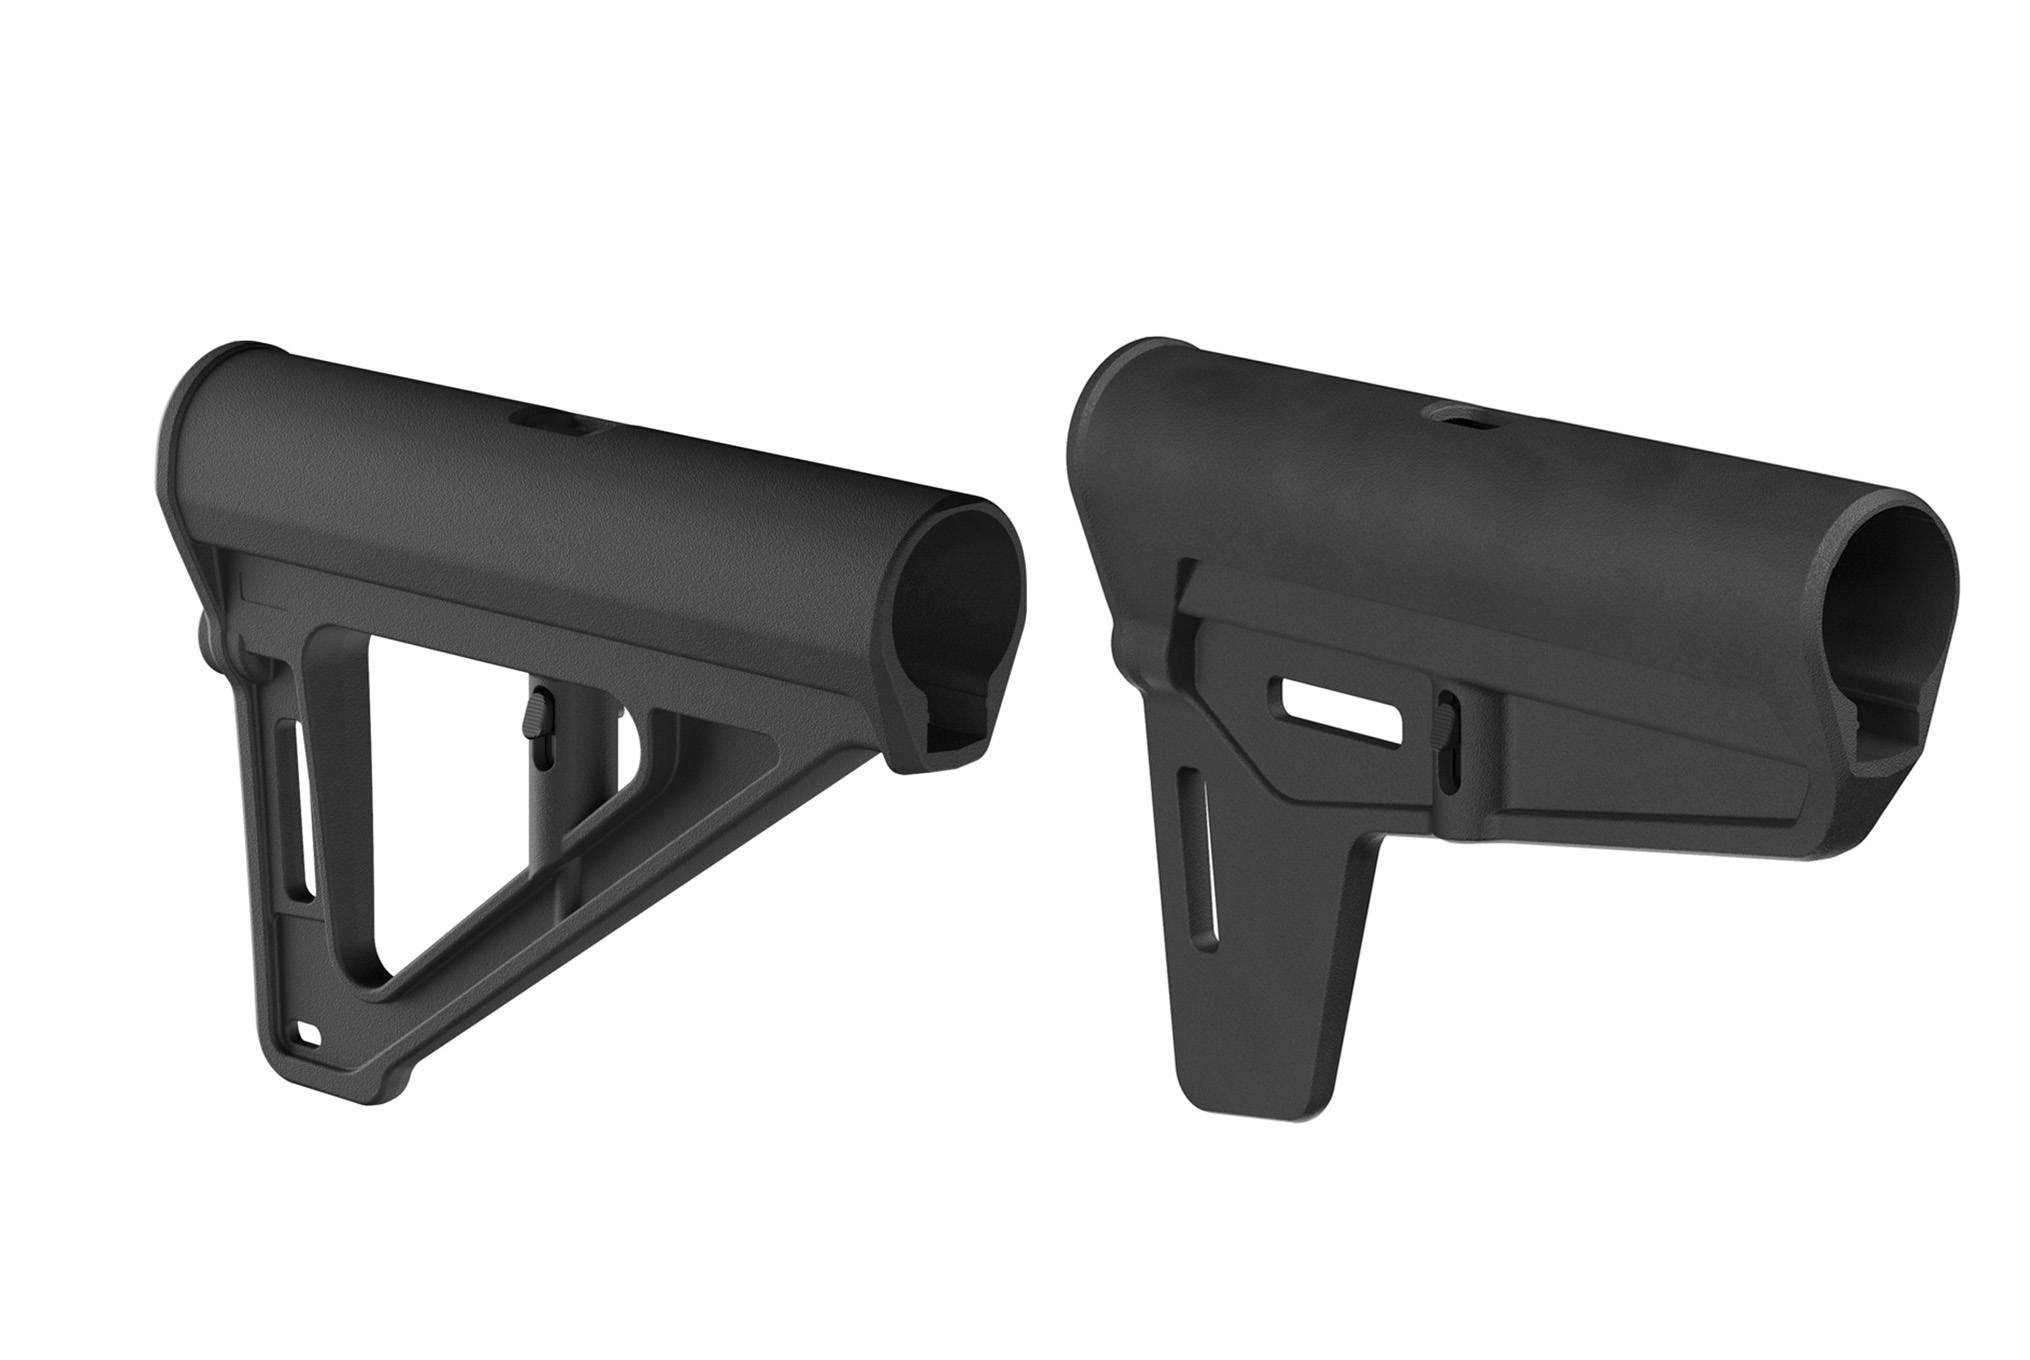 Read: Magpul Enters the AR Stabilizing Pistol Brace Market with its BTR and...